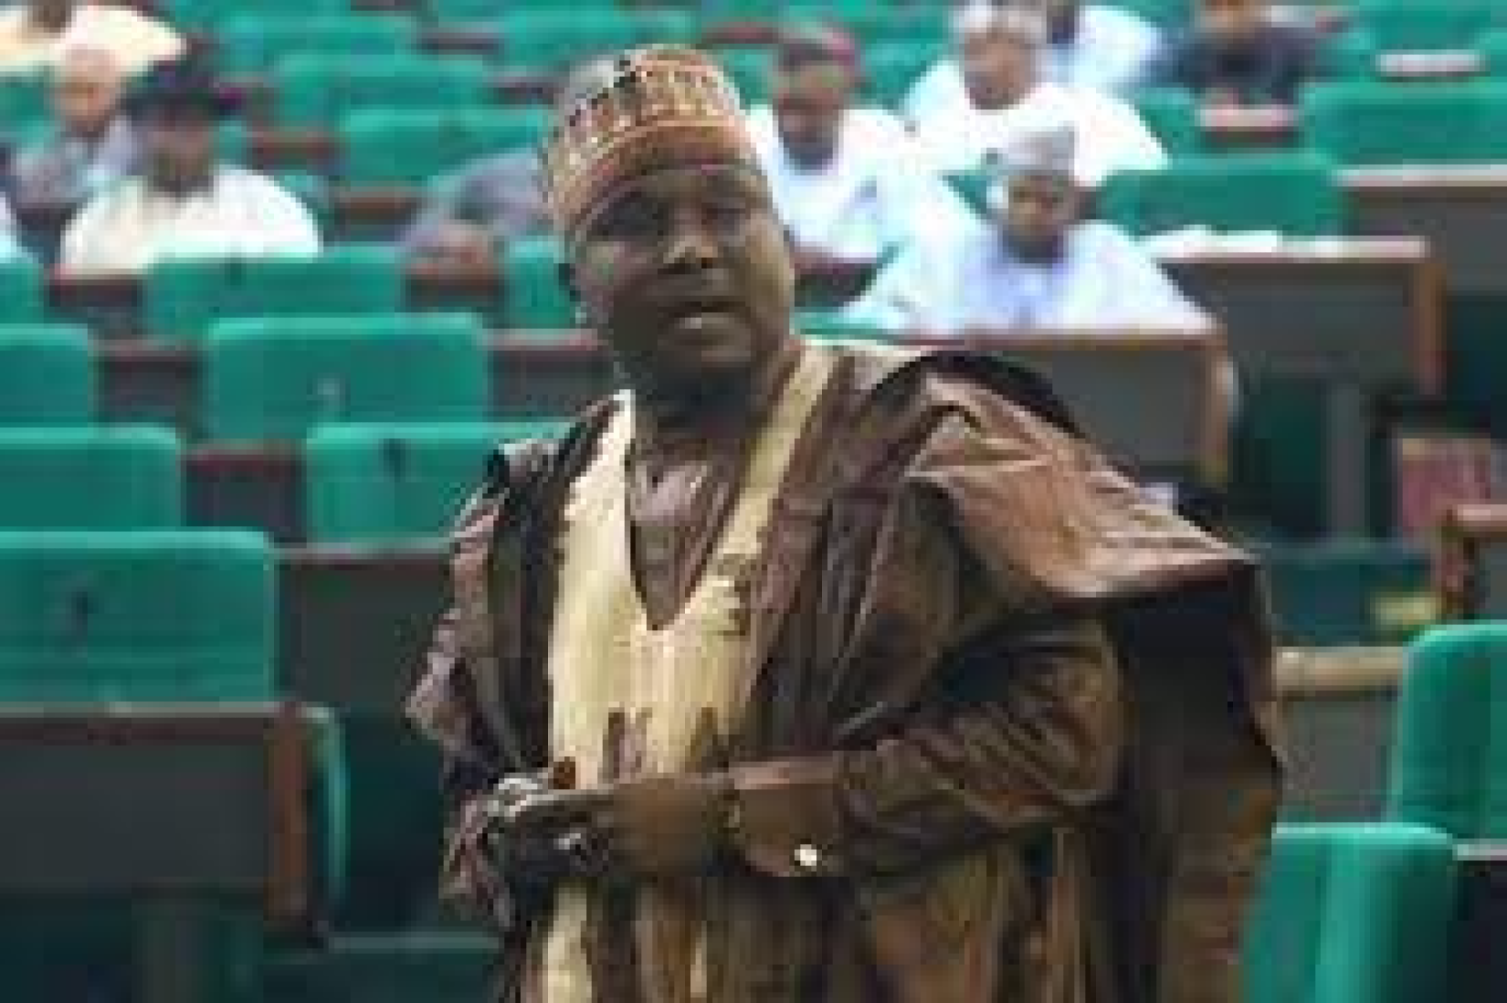 House of Reps Majority leader Alhassan Ado Doguwa remanded in prison for alleged murder 